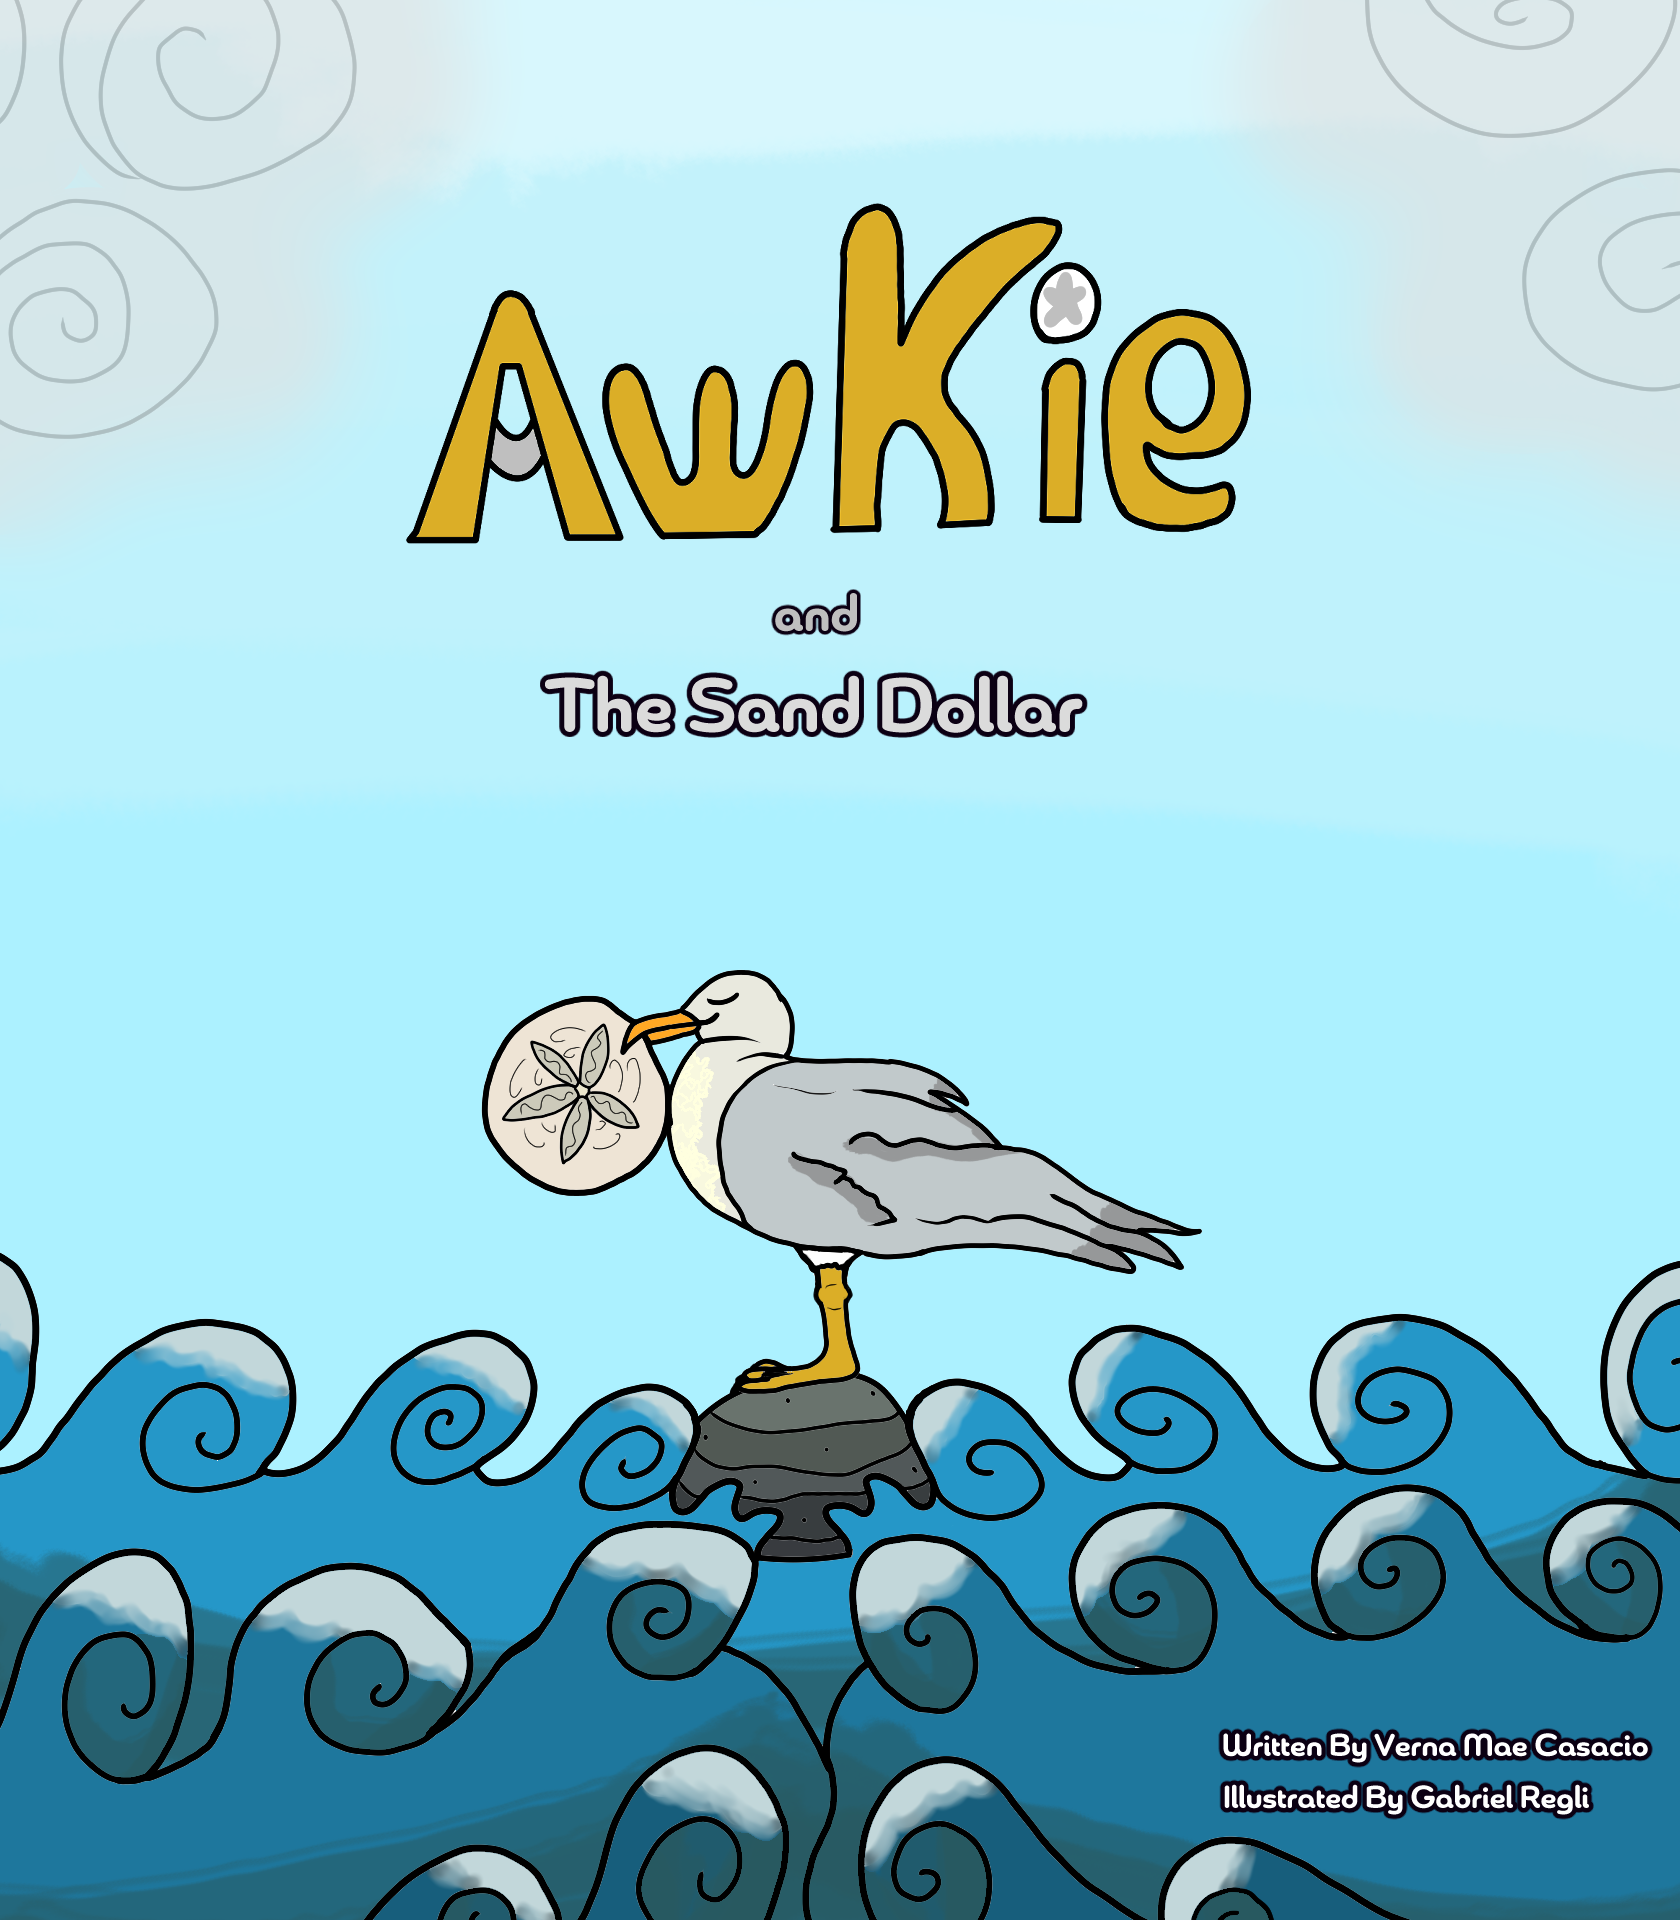 Awkie and the Sand Dollar